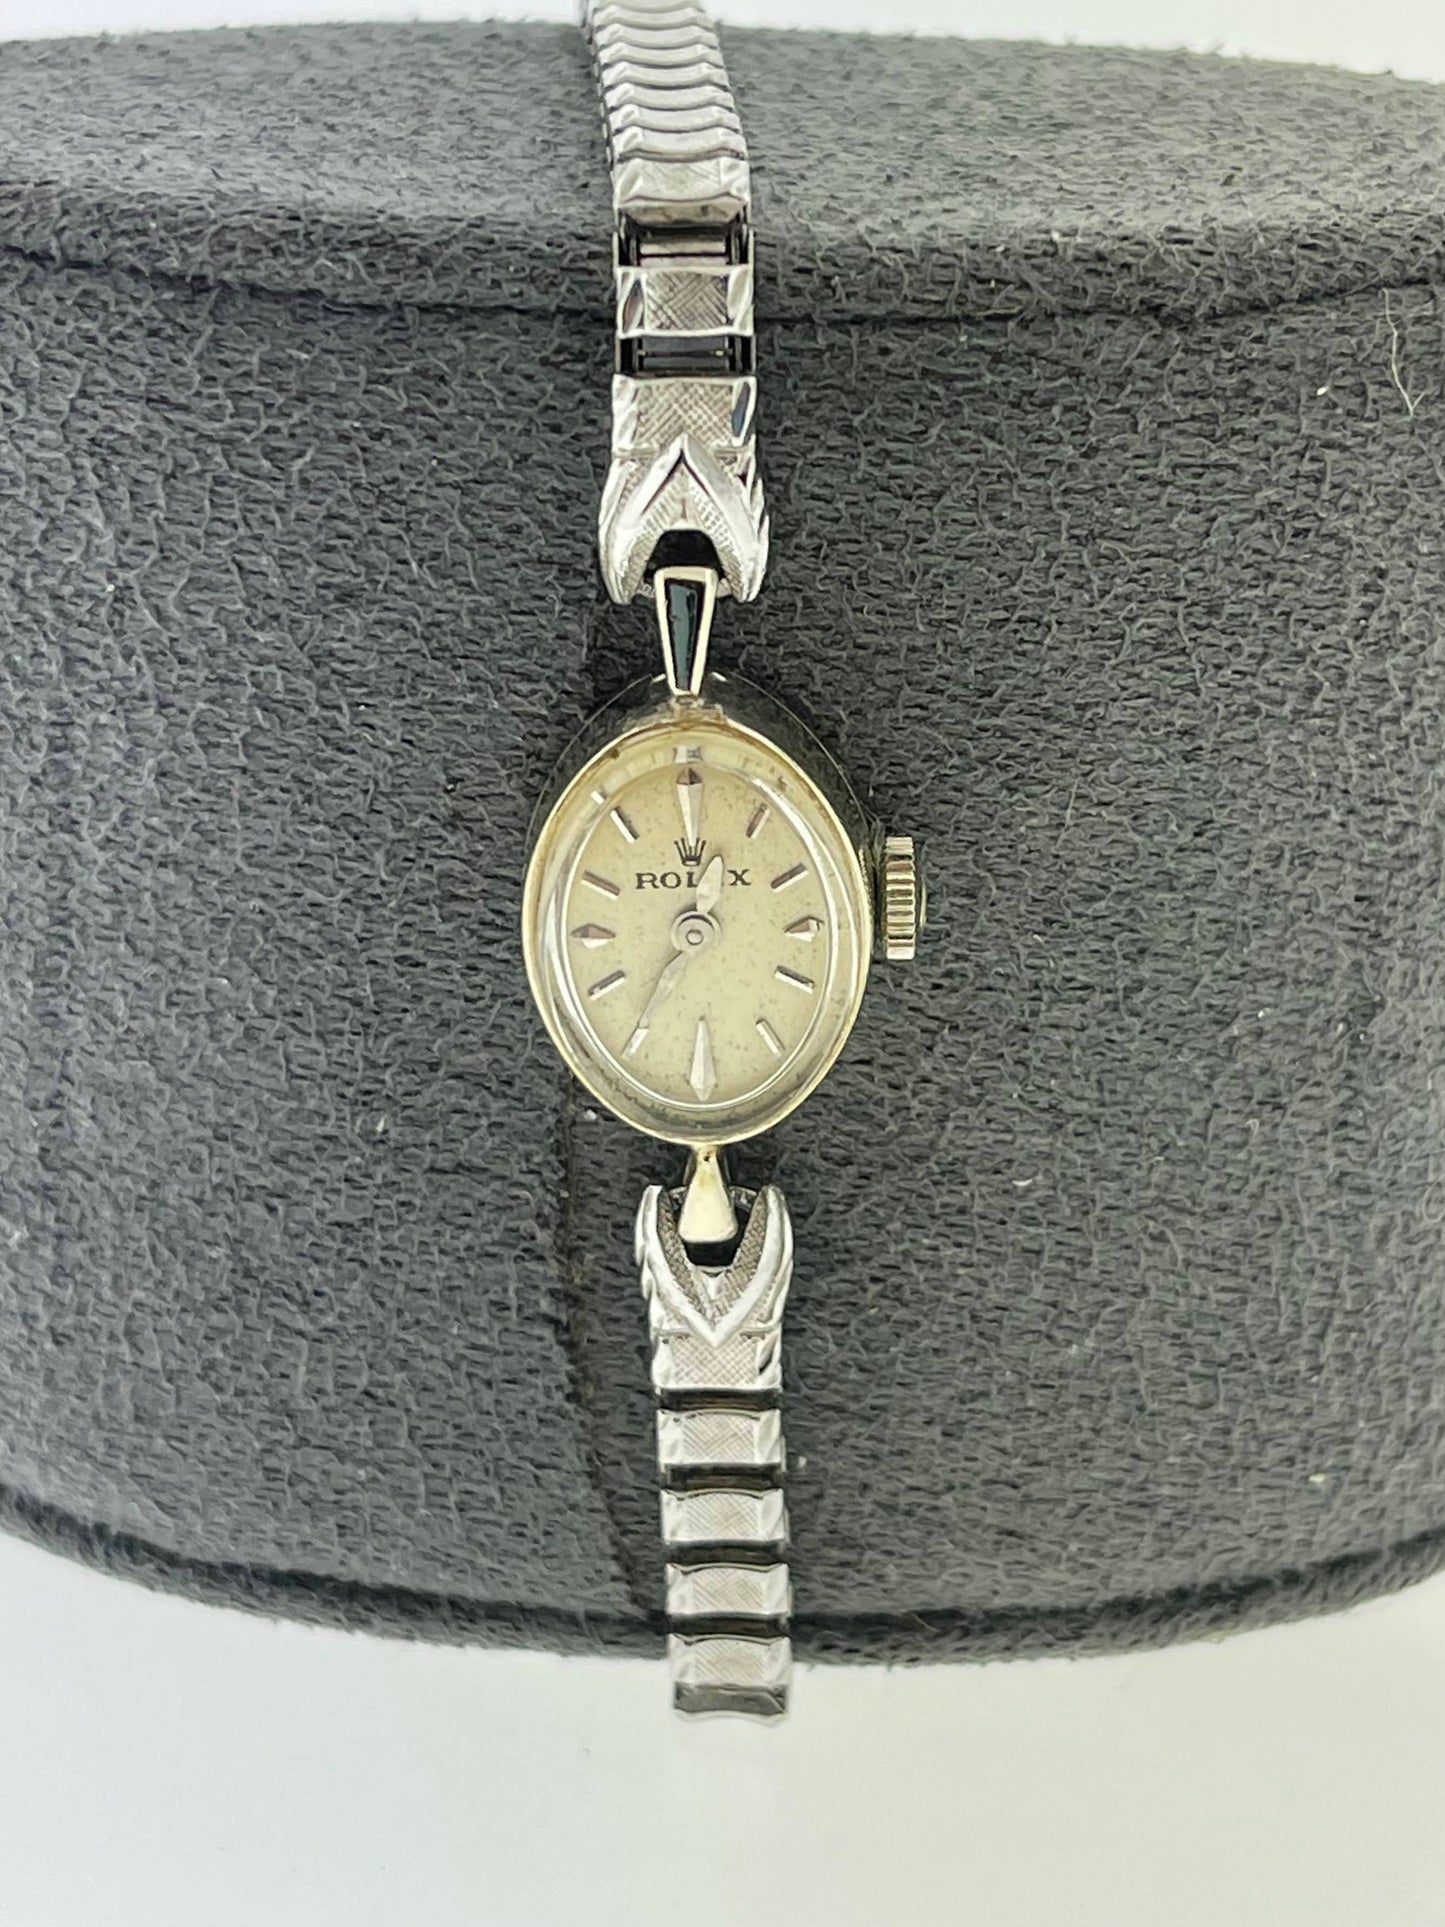 Rolex Vintage Ladies Cocktail Watch White Dial No Papers